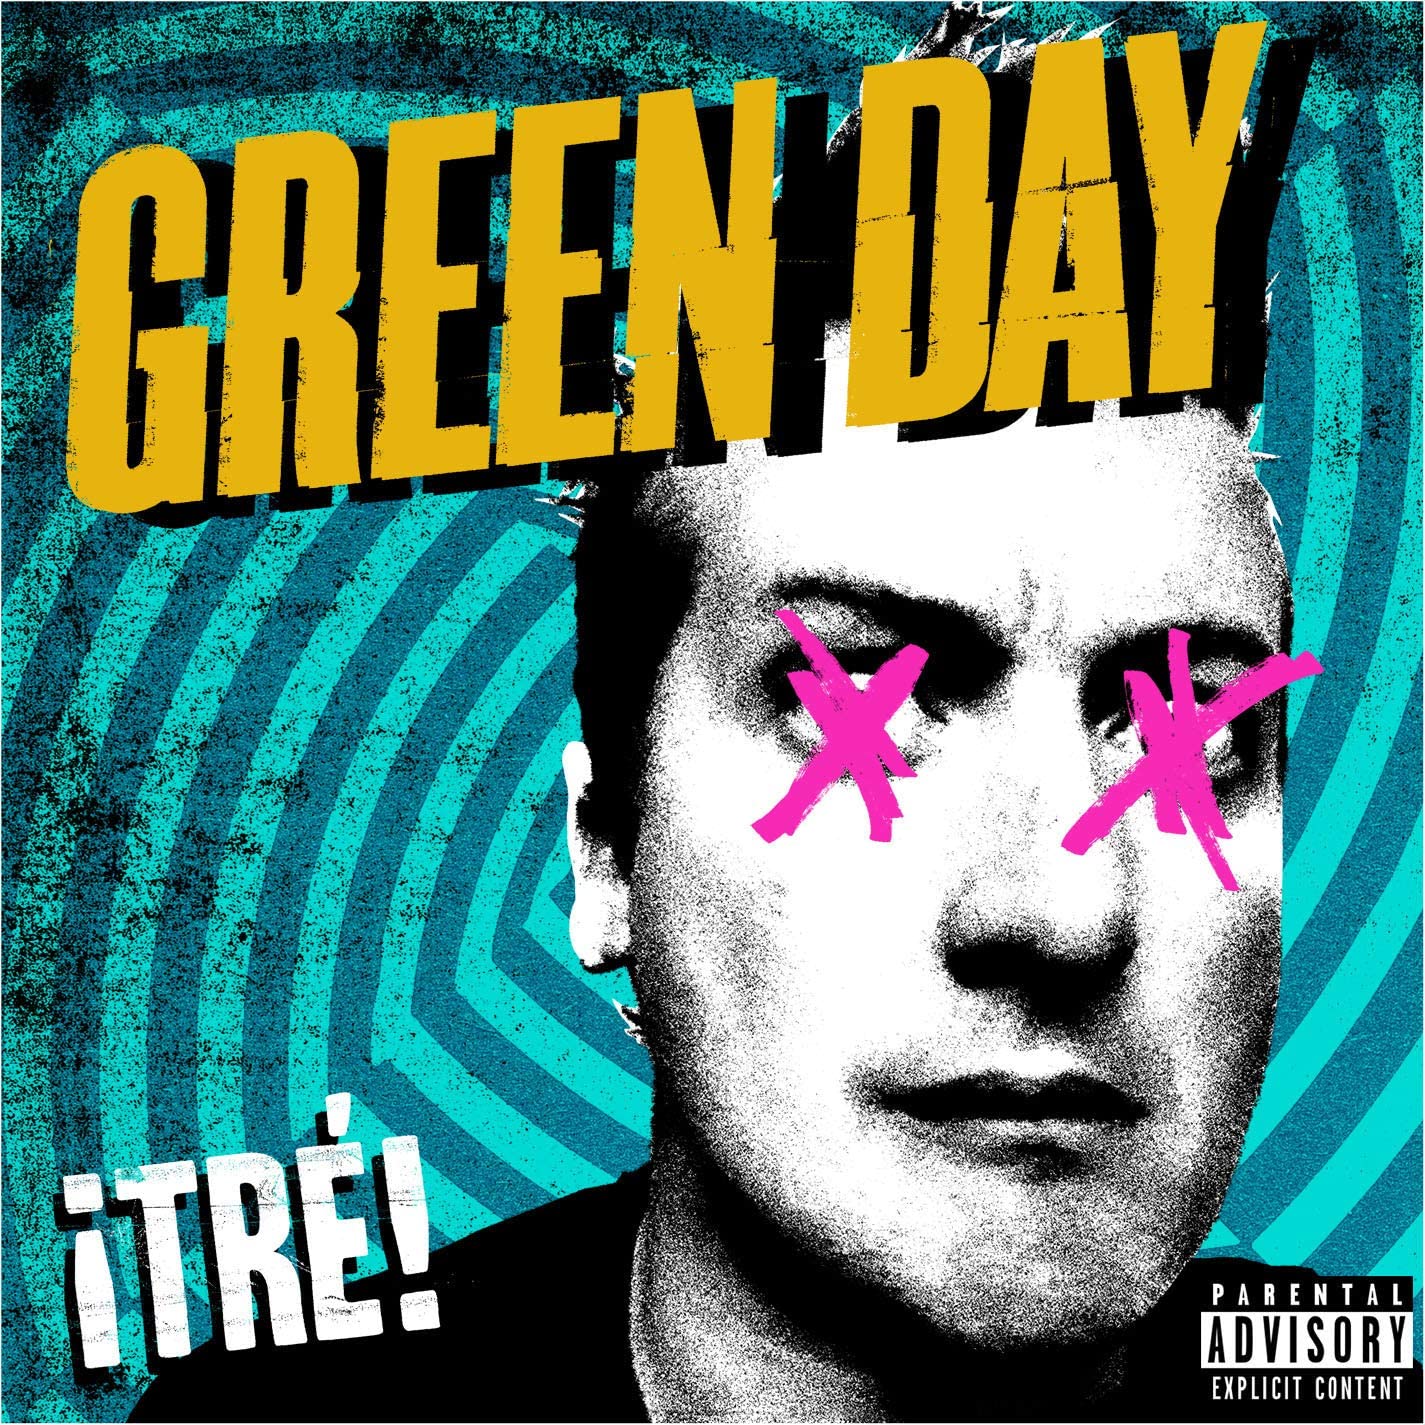 Green Day – ¡TRÉ! - USED CD